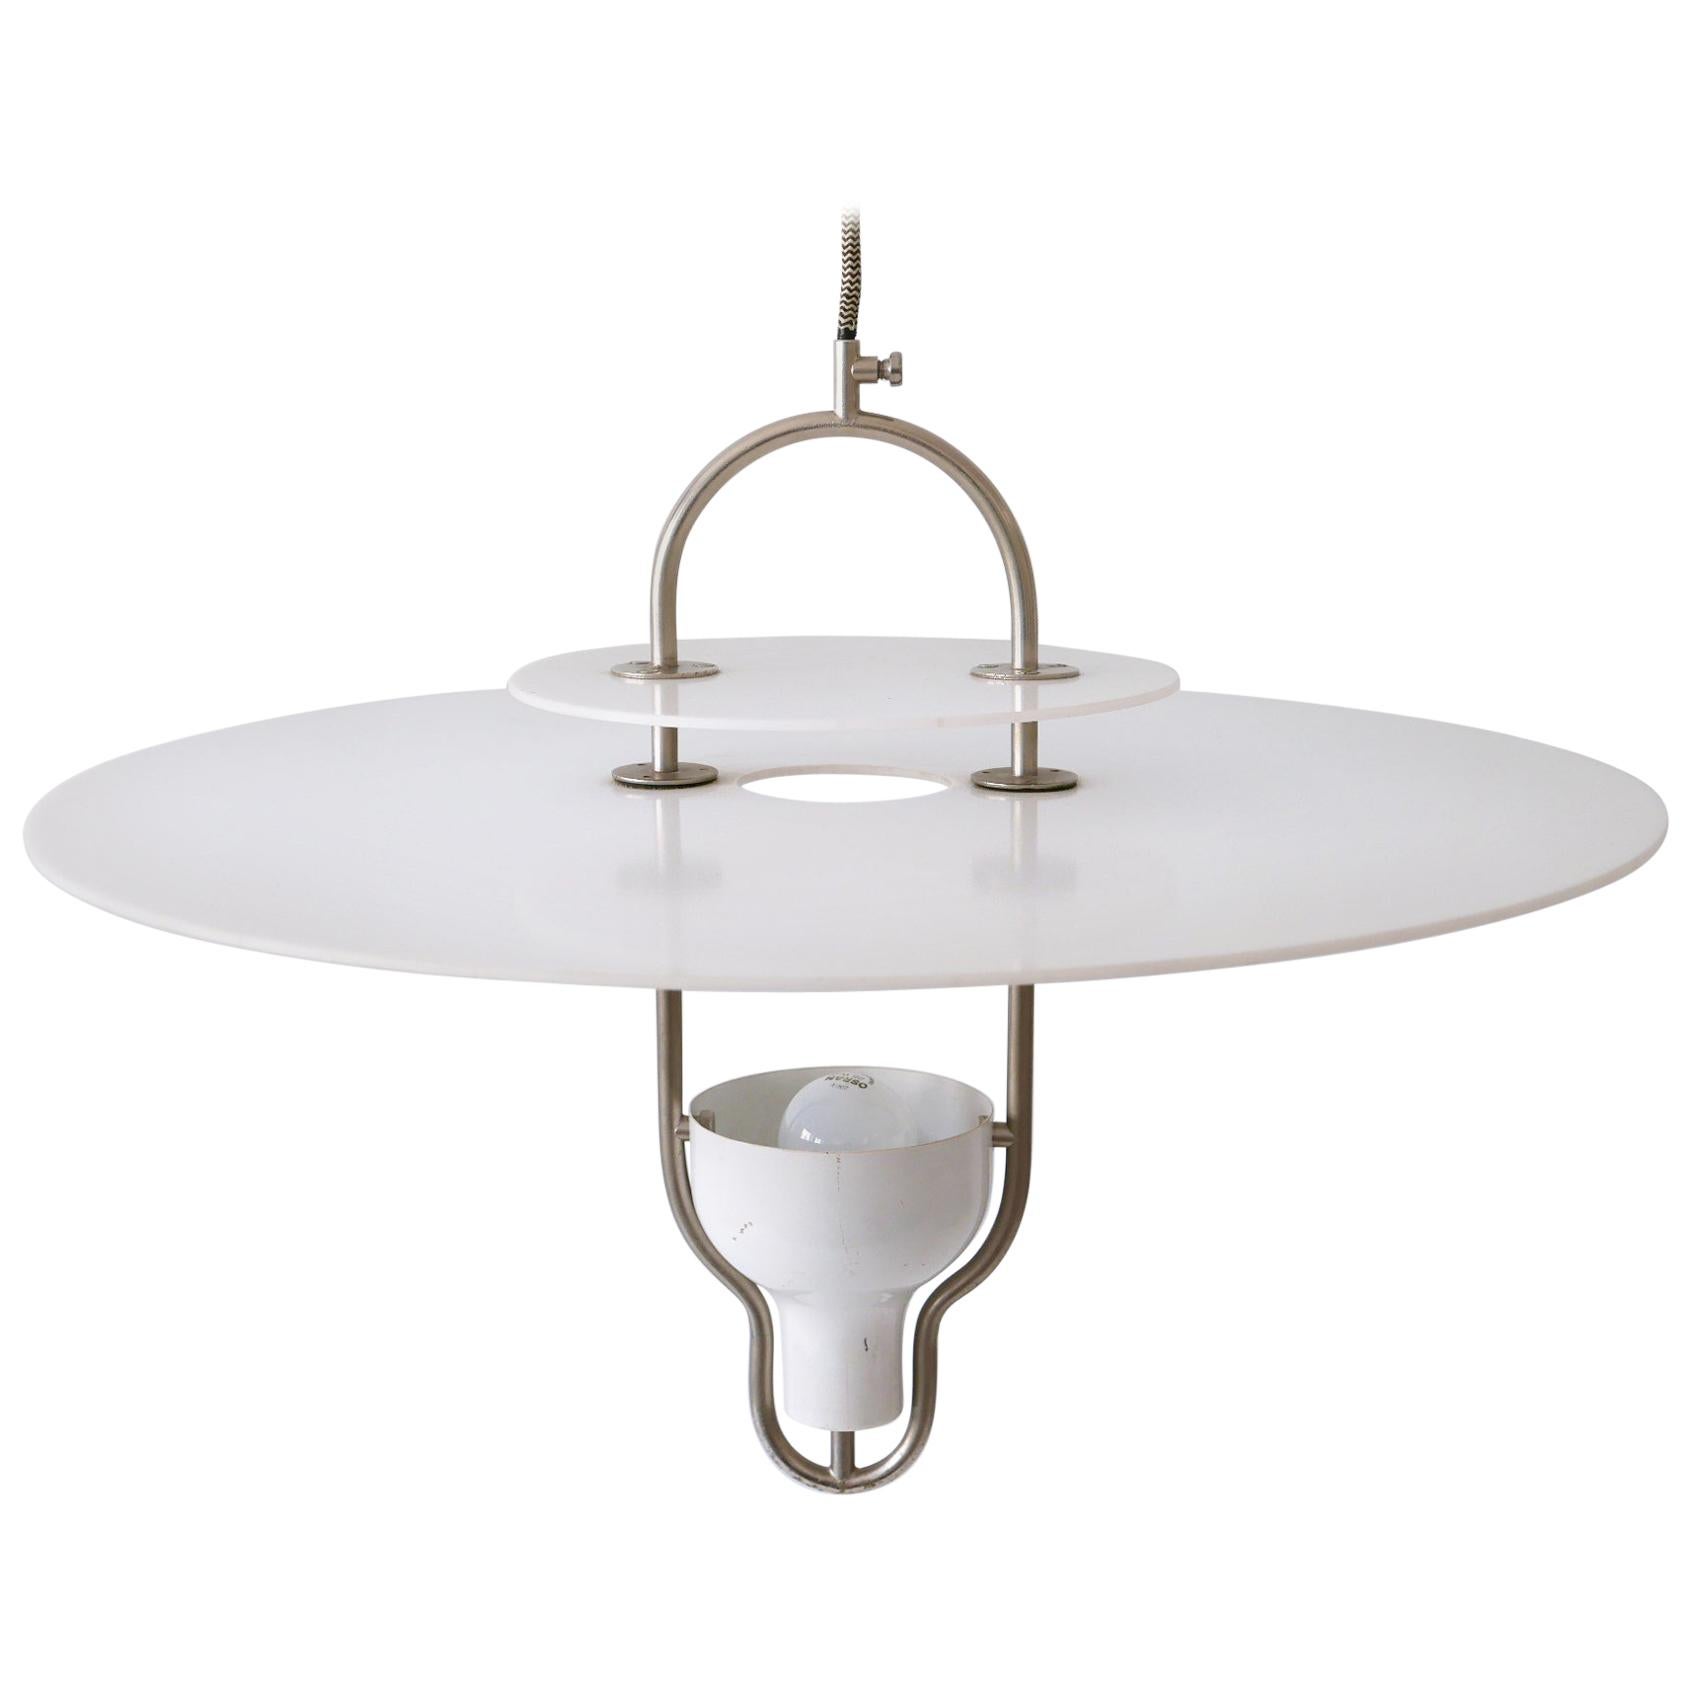 Exceptional Mid-Century Modern Ufo Pendant Lamp, Italy, 1960s For Sale